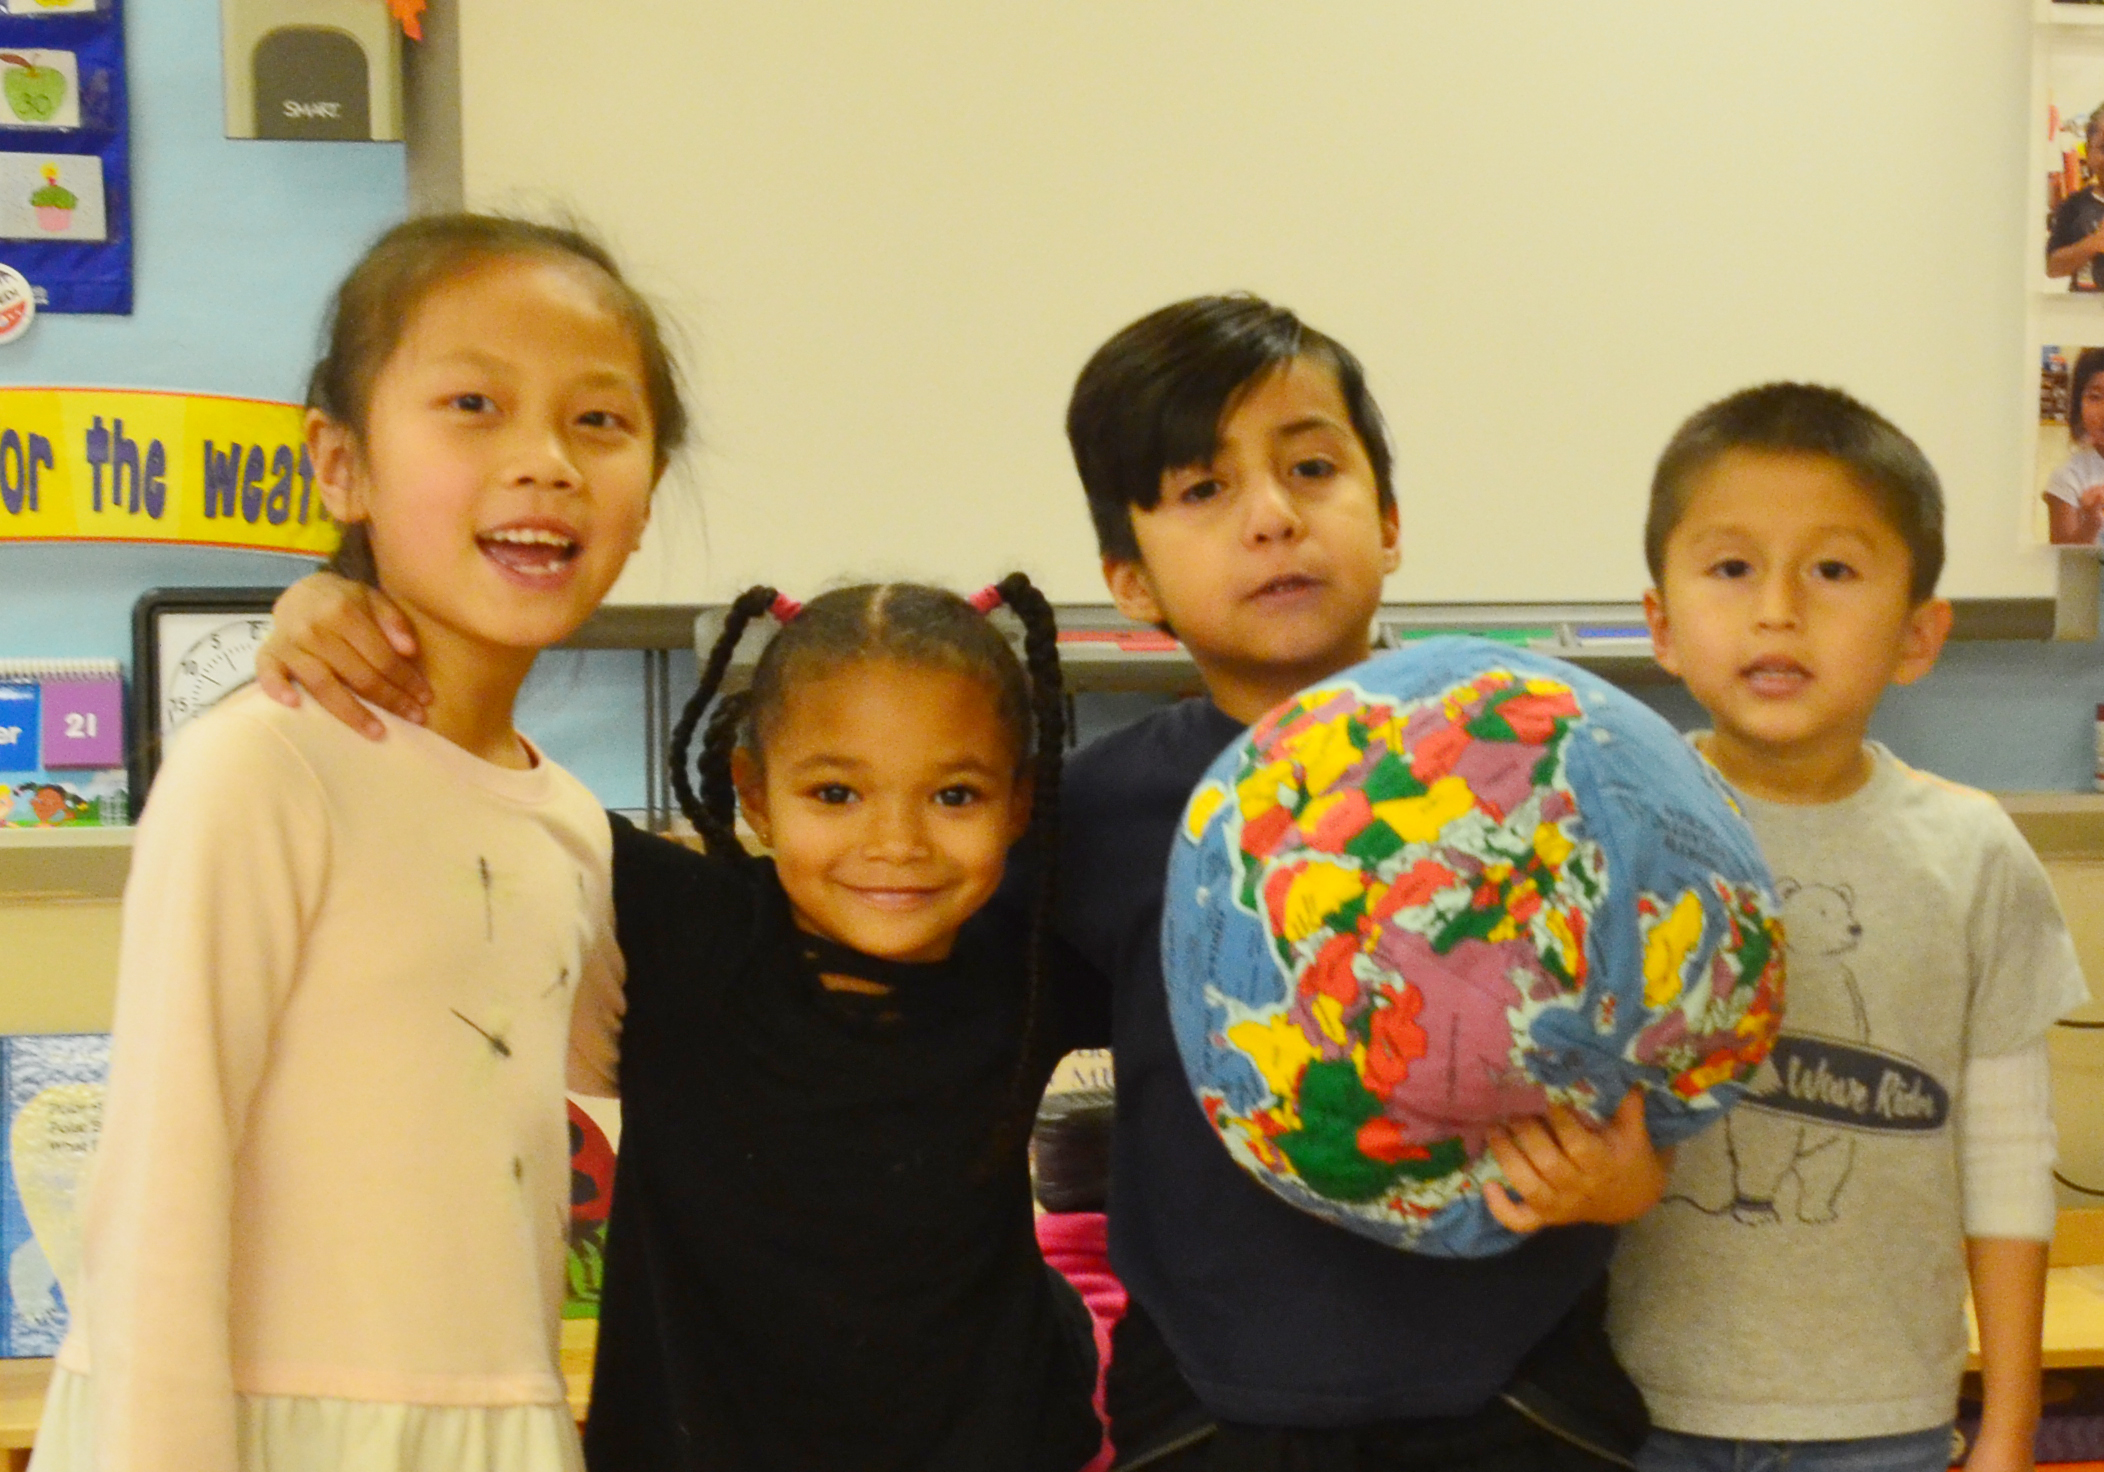 PAZ students with a hugg-a-planet